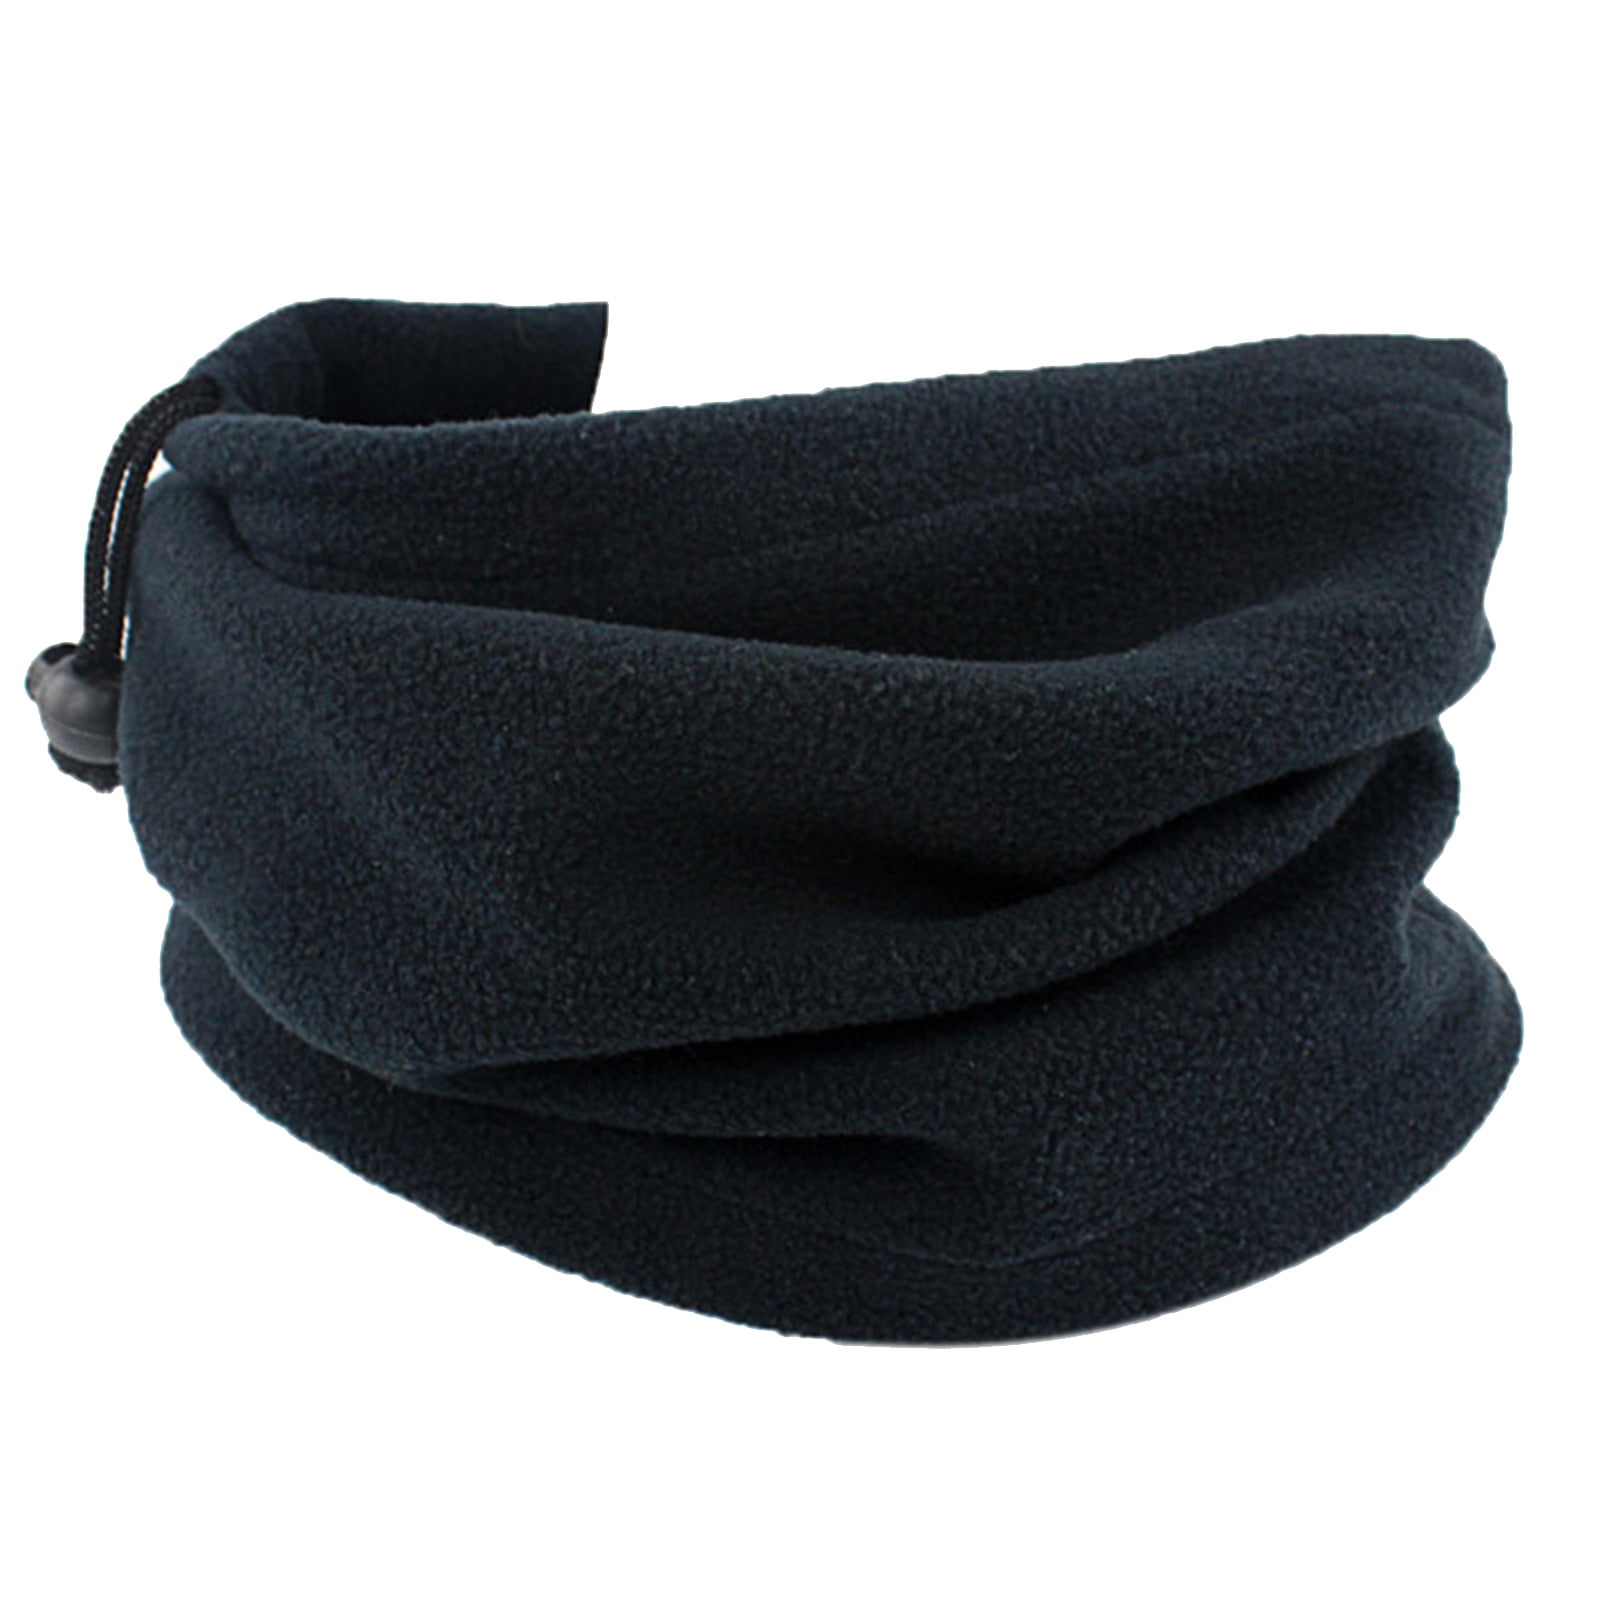 Details about   Winter Faux Fleece Neck Gaiter Warmer Cycling Drawstring Face Cover Scarf Tube 